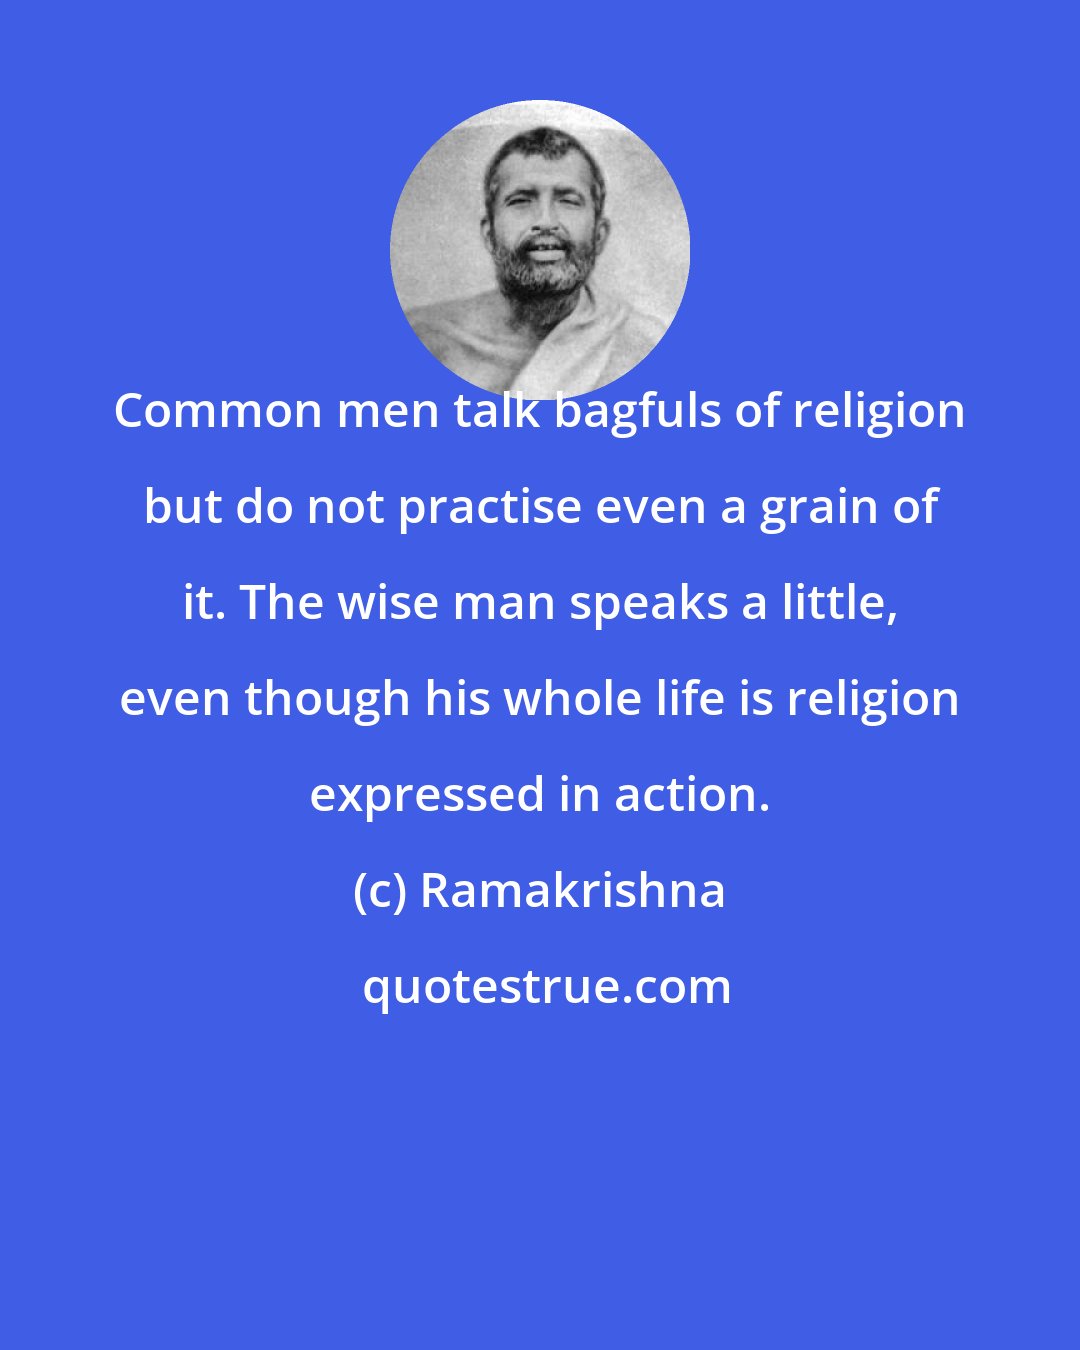 Ramakrishna: Common men talk bagfuls of religion but do not practise even a grain of it. The wise man speaks a little, even though his whole life is religion expressed in action.